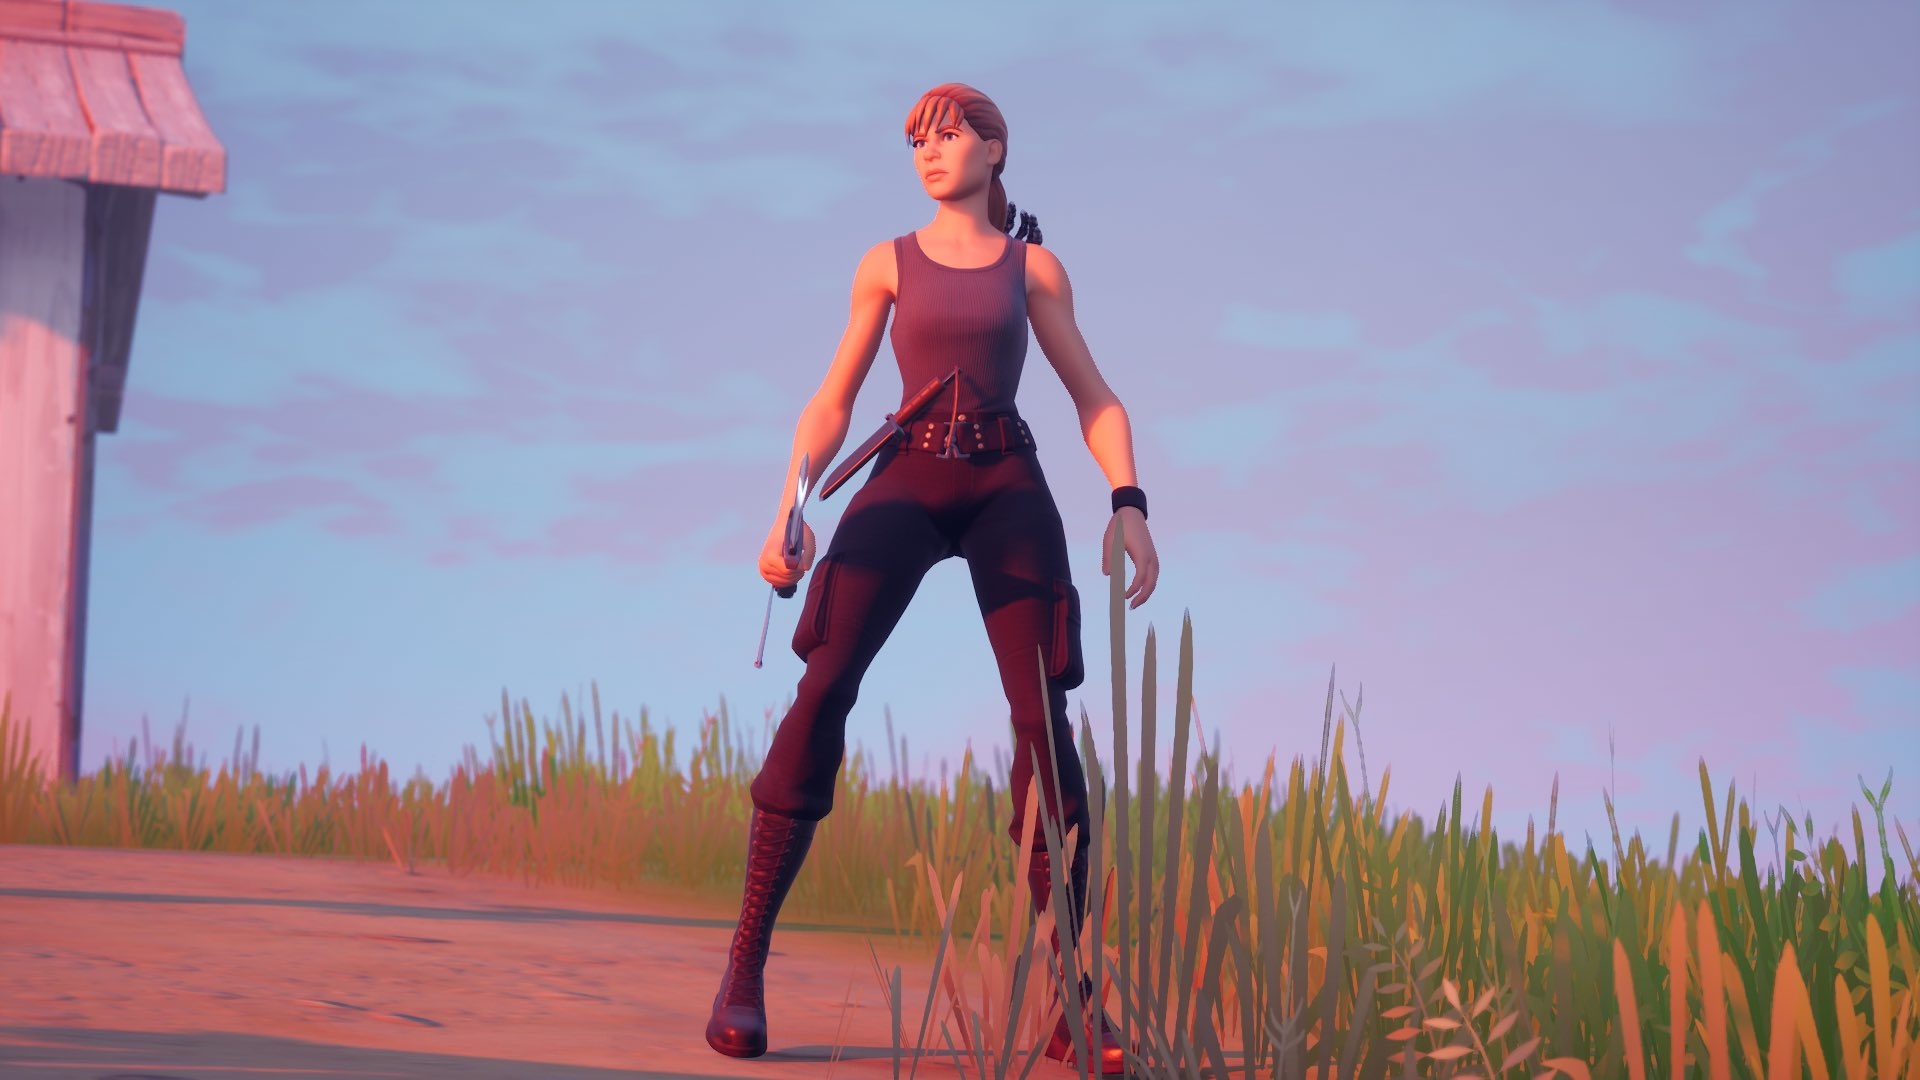 Fortnite Sarah Connor Hd Wallpaper Hd Games 4k Wallpapers Images Photos And Background Wallpapers Den